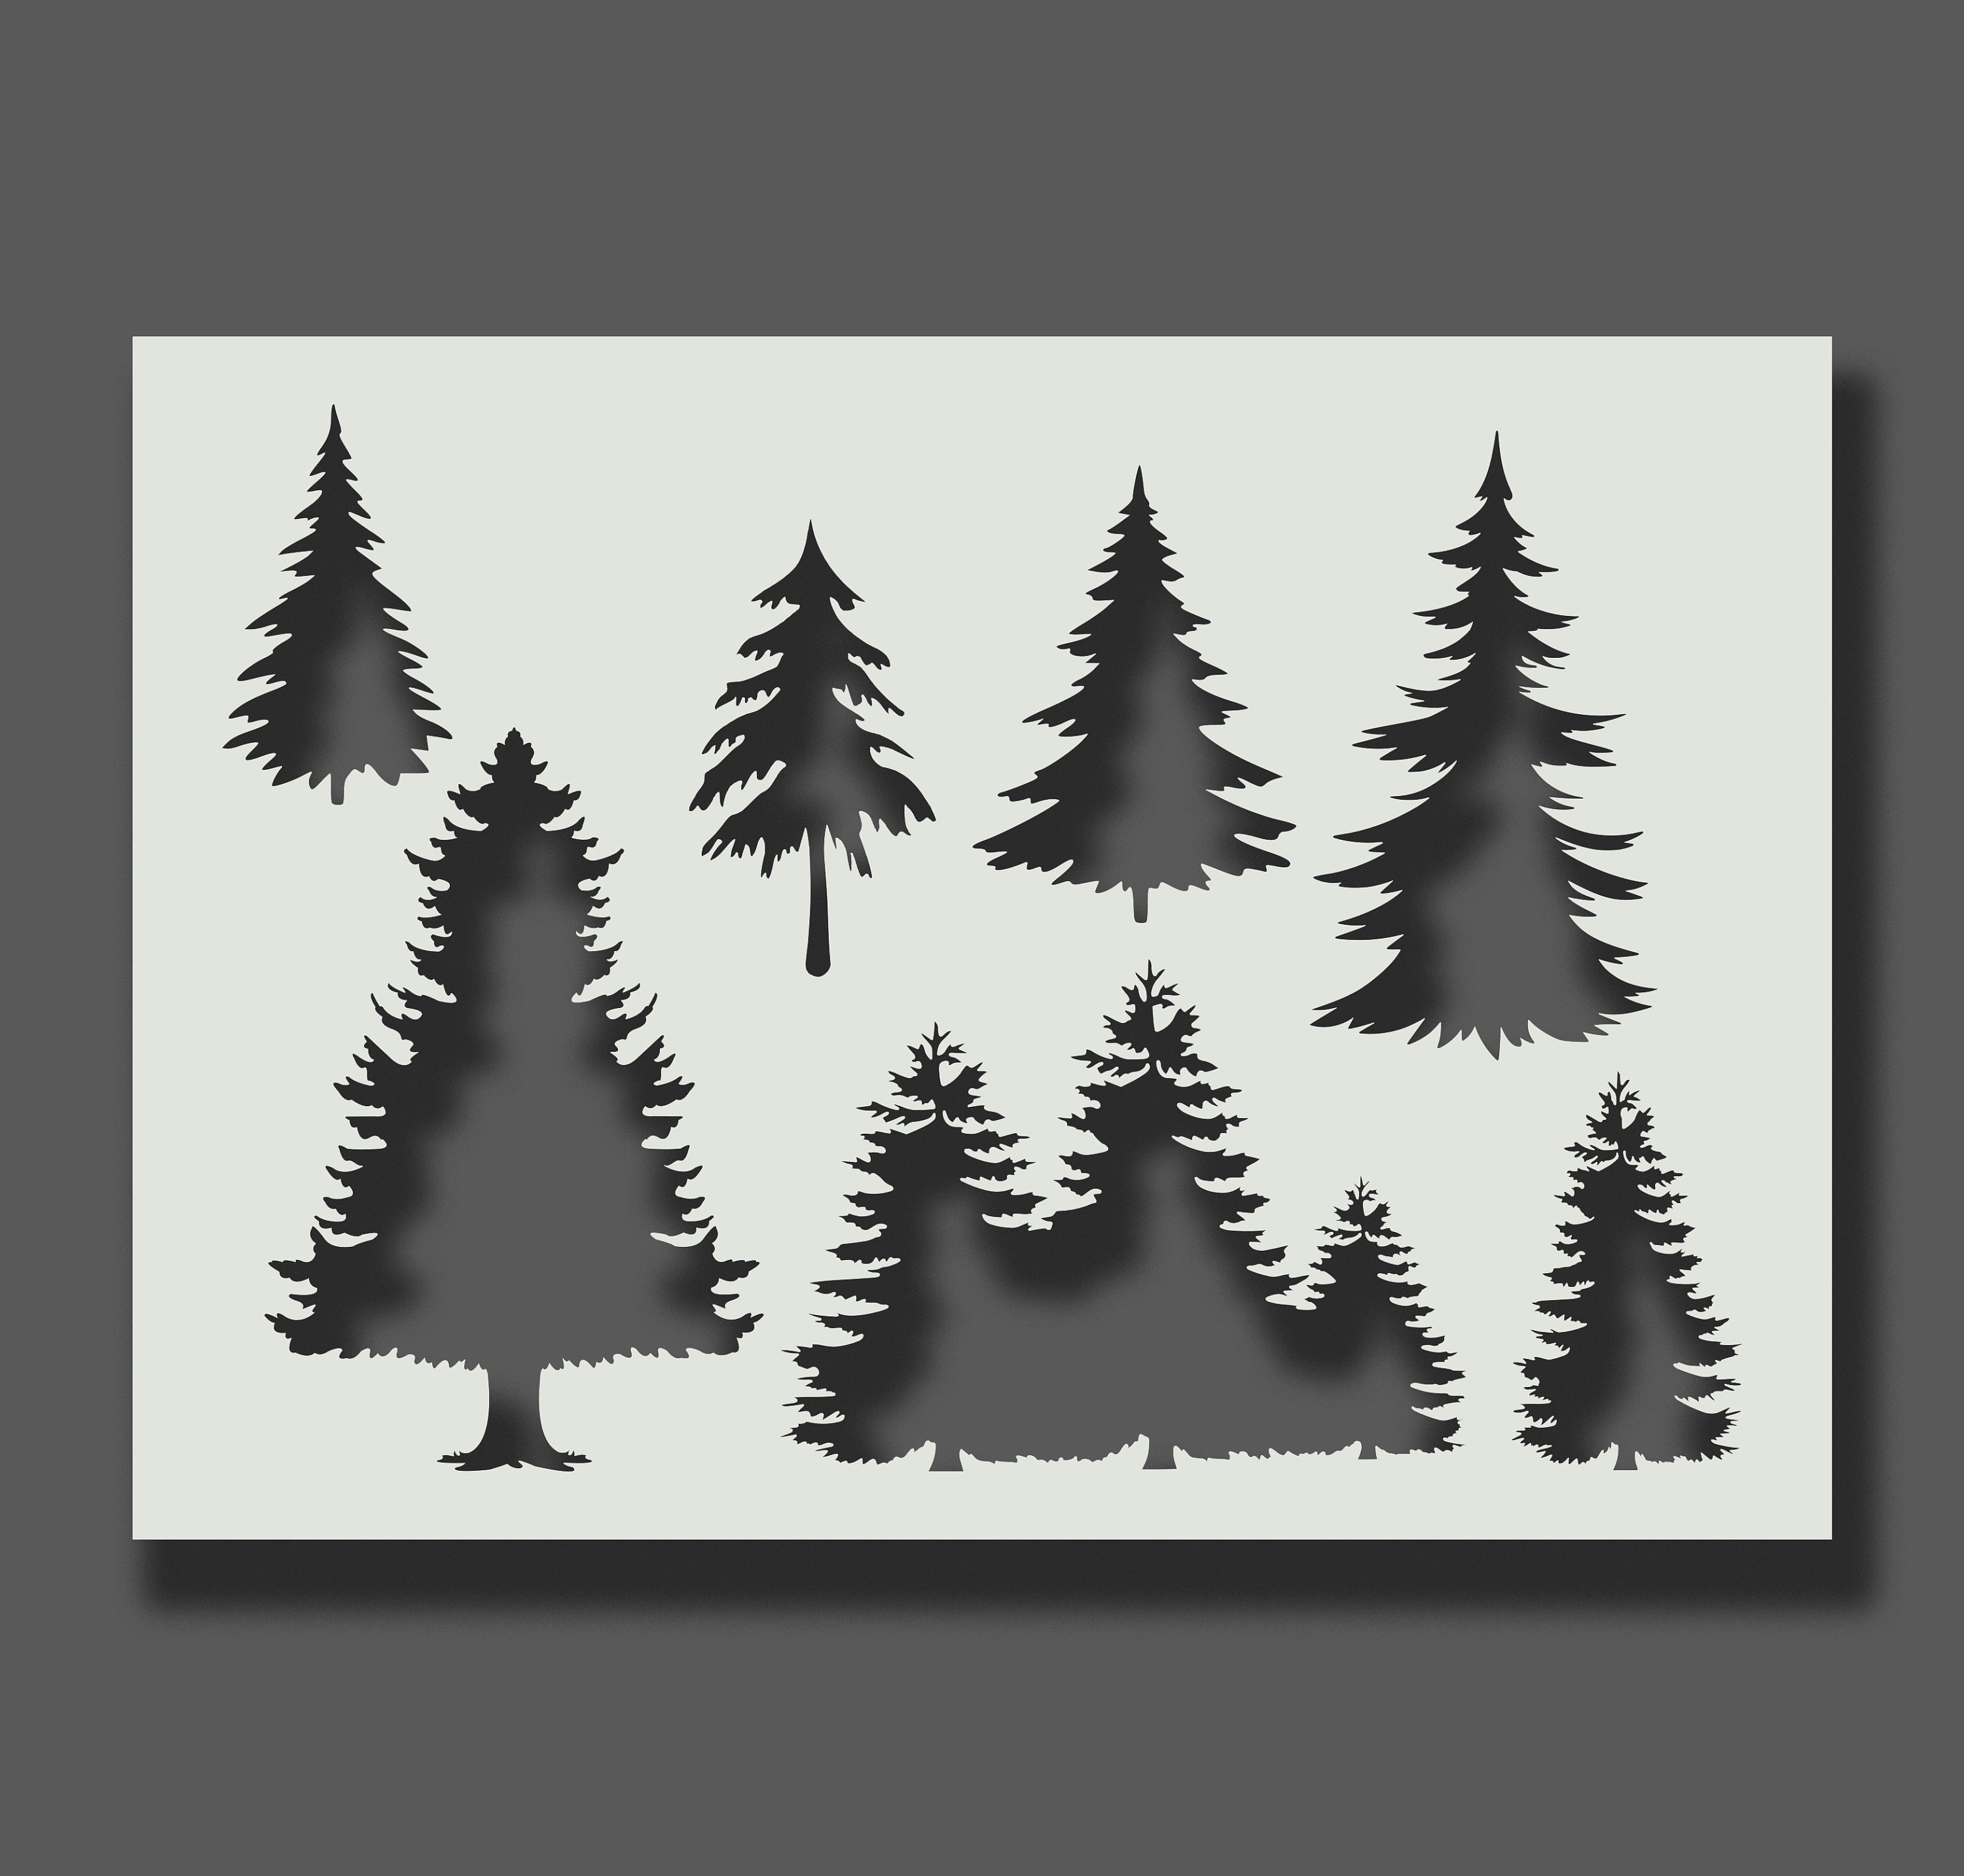 Pine Trees Stencil - Reusable Stencils for Wall Art, Home Décor, Painting,  Art & Craft, Size options - A4, A3, A2